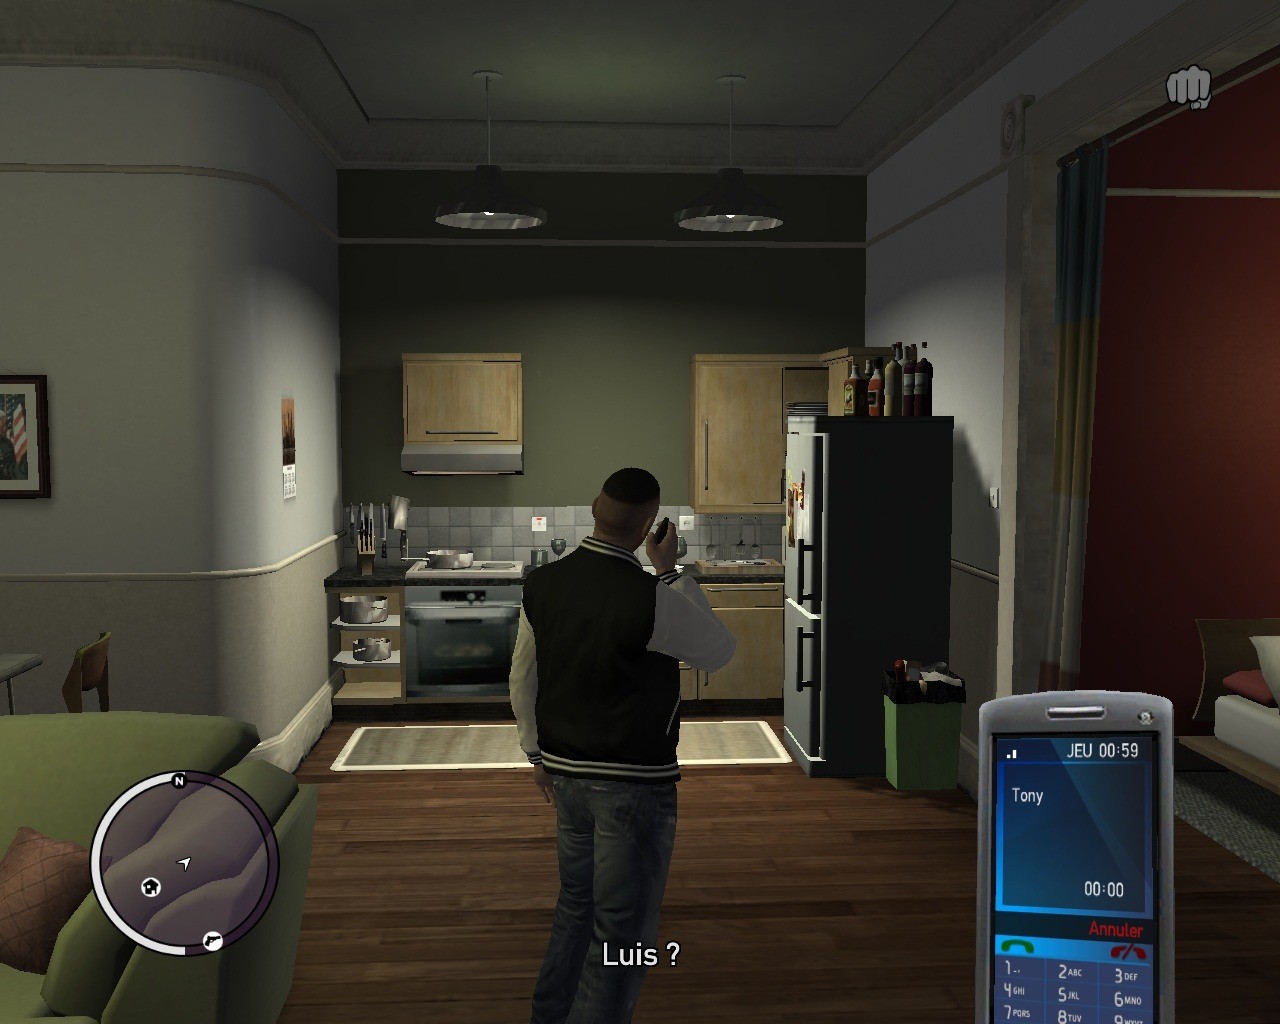 How long is Grand Theft Auto IV: The Complete Edition?